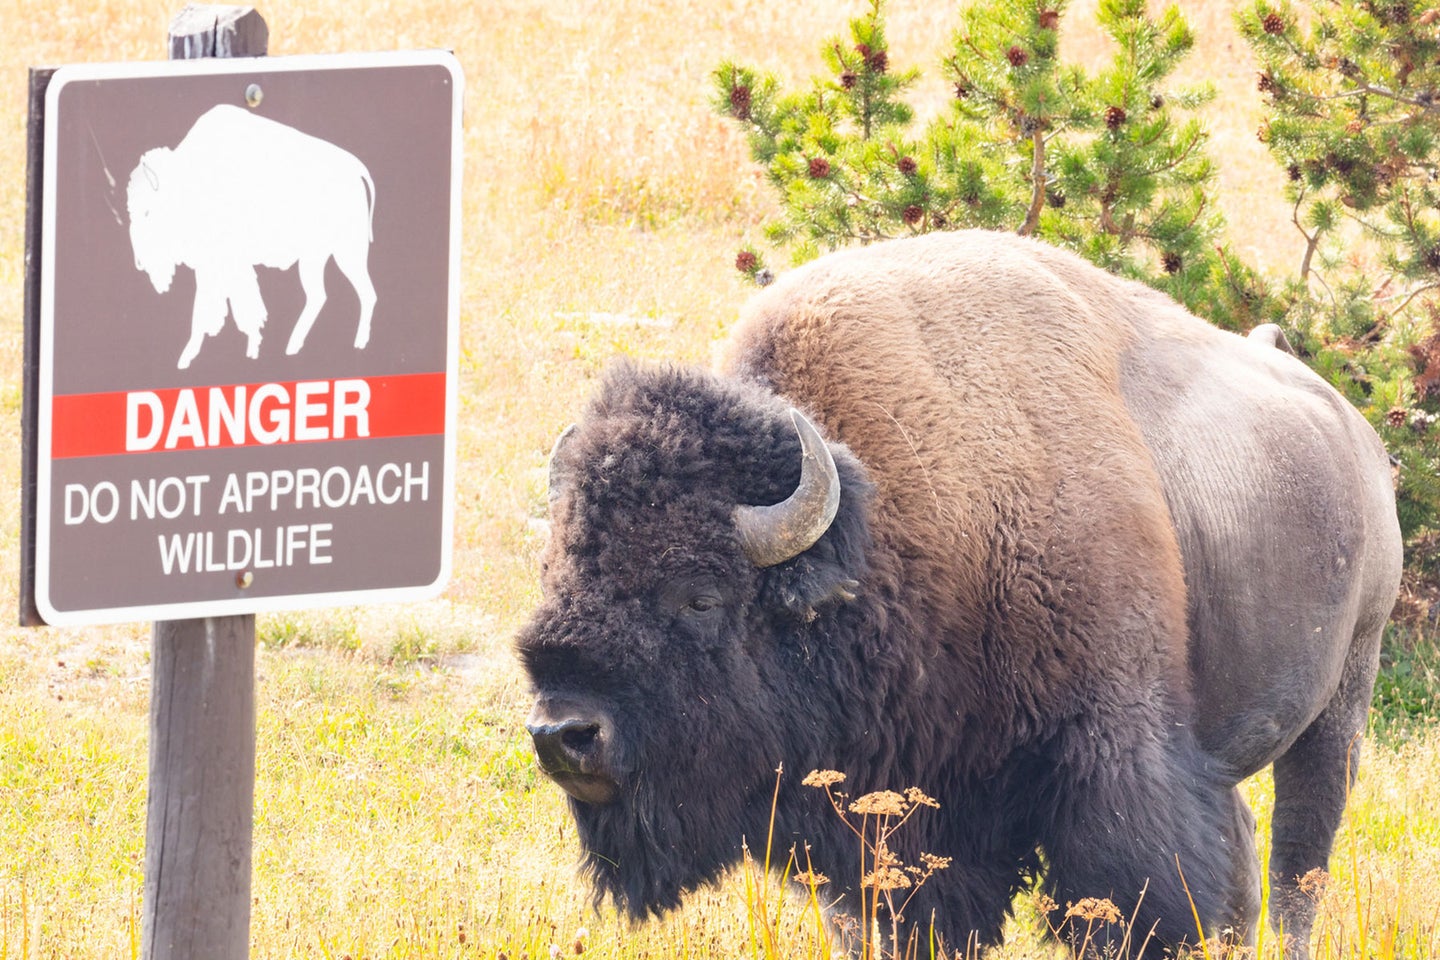 A bison stands next to a warning sign in Yellowstone National Park.